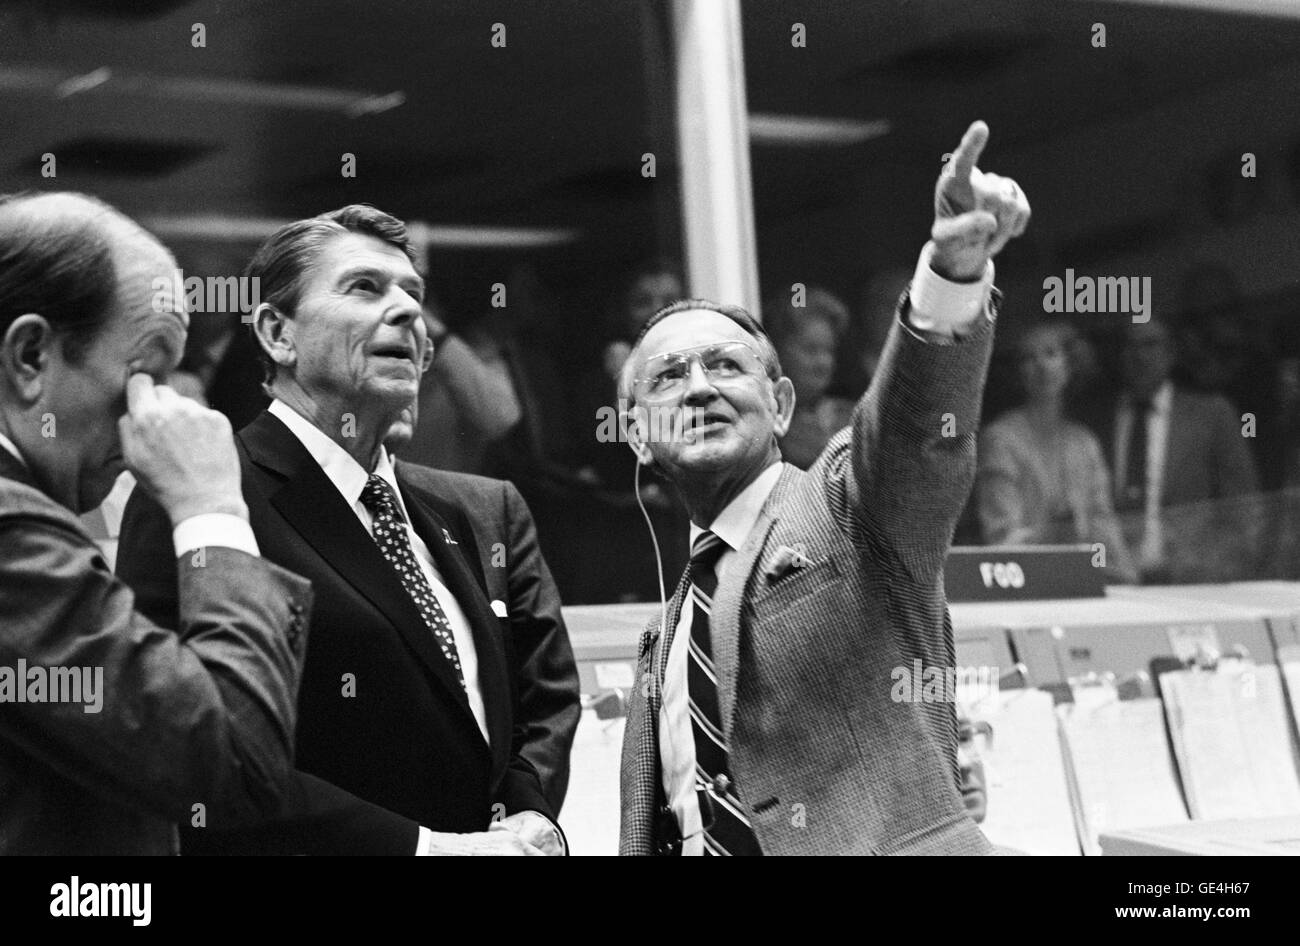 President Ronald Reagan is briefed by JSC Director Christopher C. Kraft Jr., who points toward the orbiter spotter on the projection plotter in the front of the mission operations control room in the Johnson Space Center's Mission Control Center. This picture was taken just prior to a space-to-ground conversation between STS-2 crew members Joe H. Engle and Richard H. Truly, who were orbiting Earth in the space shuttle Columbia.   Photo credit: NASA  Photo Number: S81-39499  Date: November 13, 1981 Stock Photo